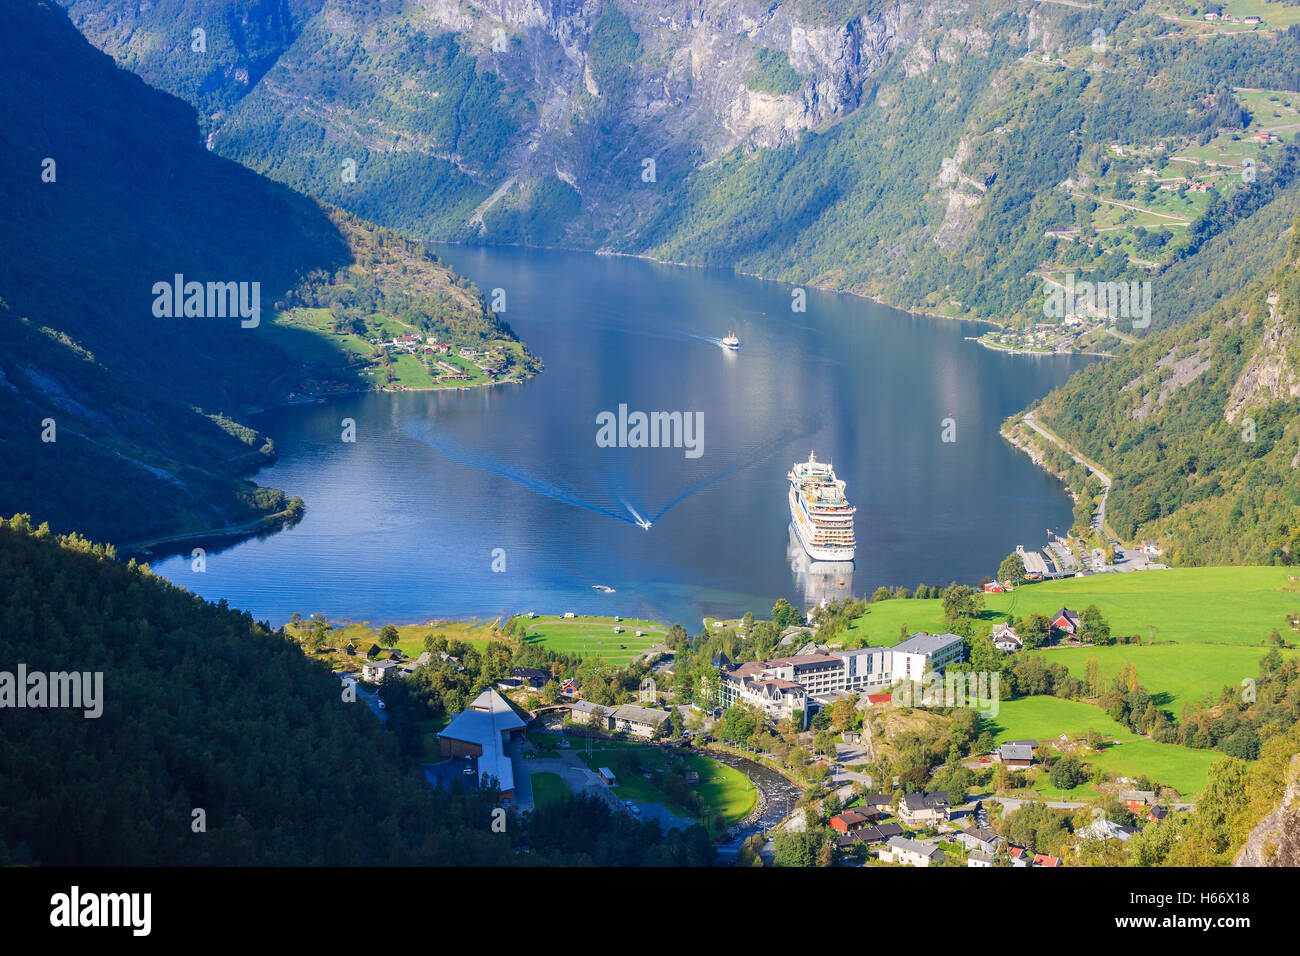 Cruiseship the Aida Sol in the Geirangerfjord seen from Flydalsjuvet, Norway Stock Photo